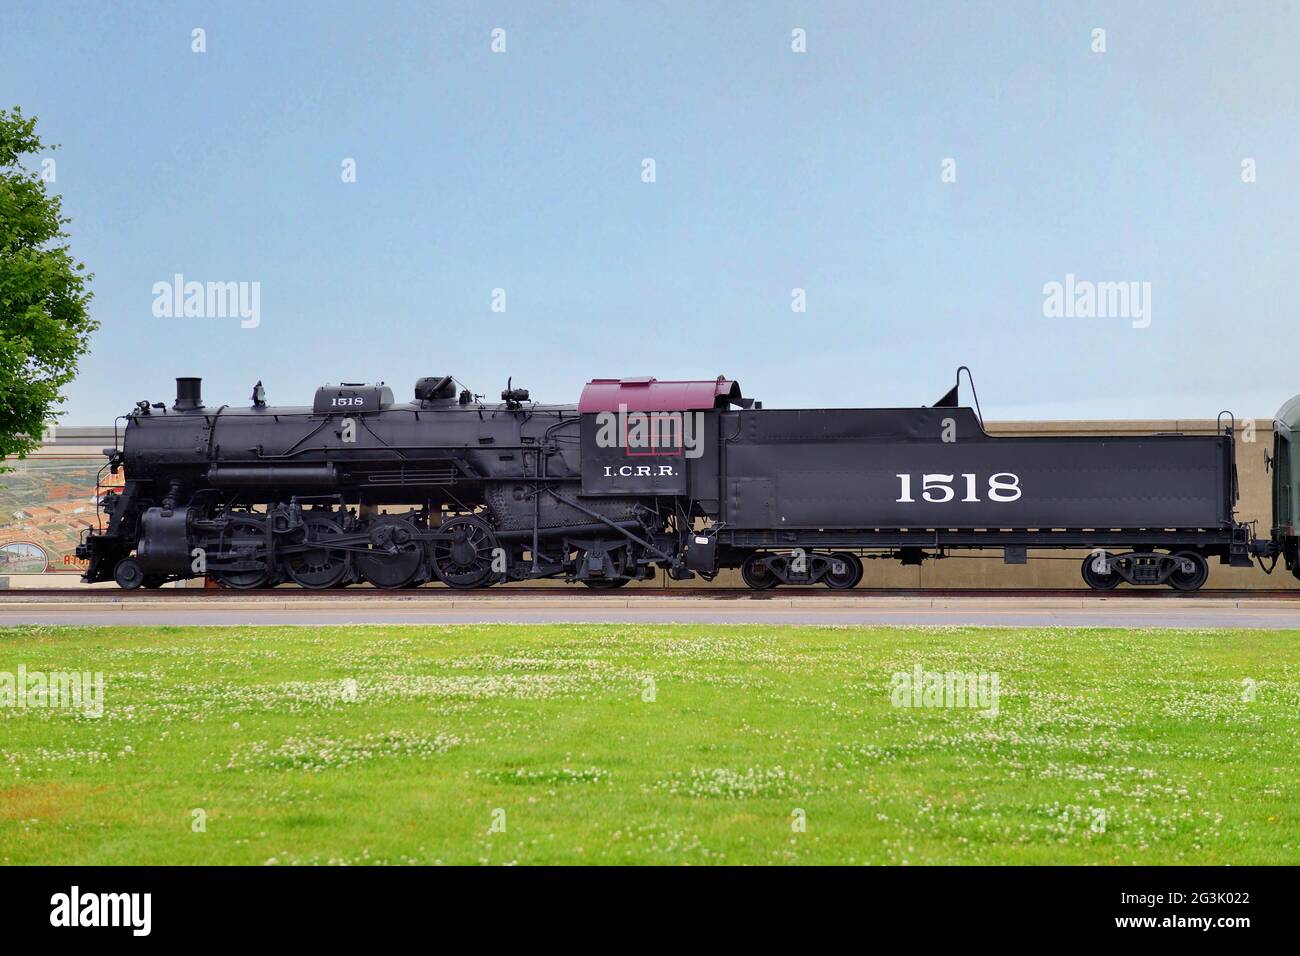 Paducah, Kentucky, USA. An Illinois Central steam locomotive, #1518, a 2-8-2, Mikado class, on display at the Paducah Railroad Museum. The locomotive Stock Photo